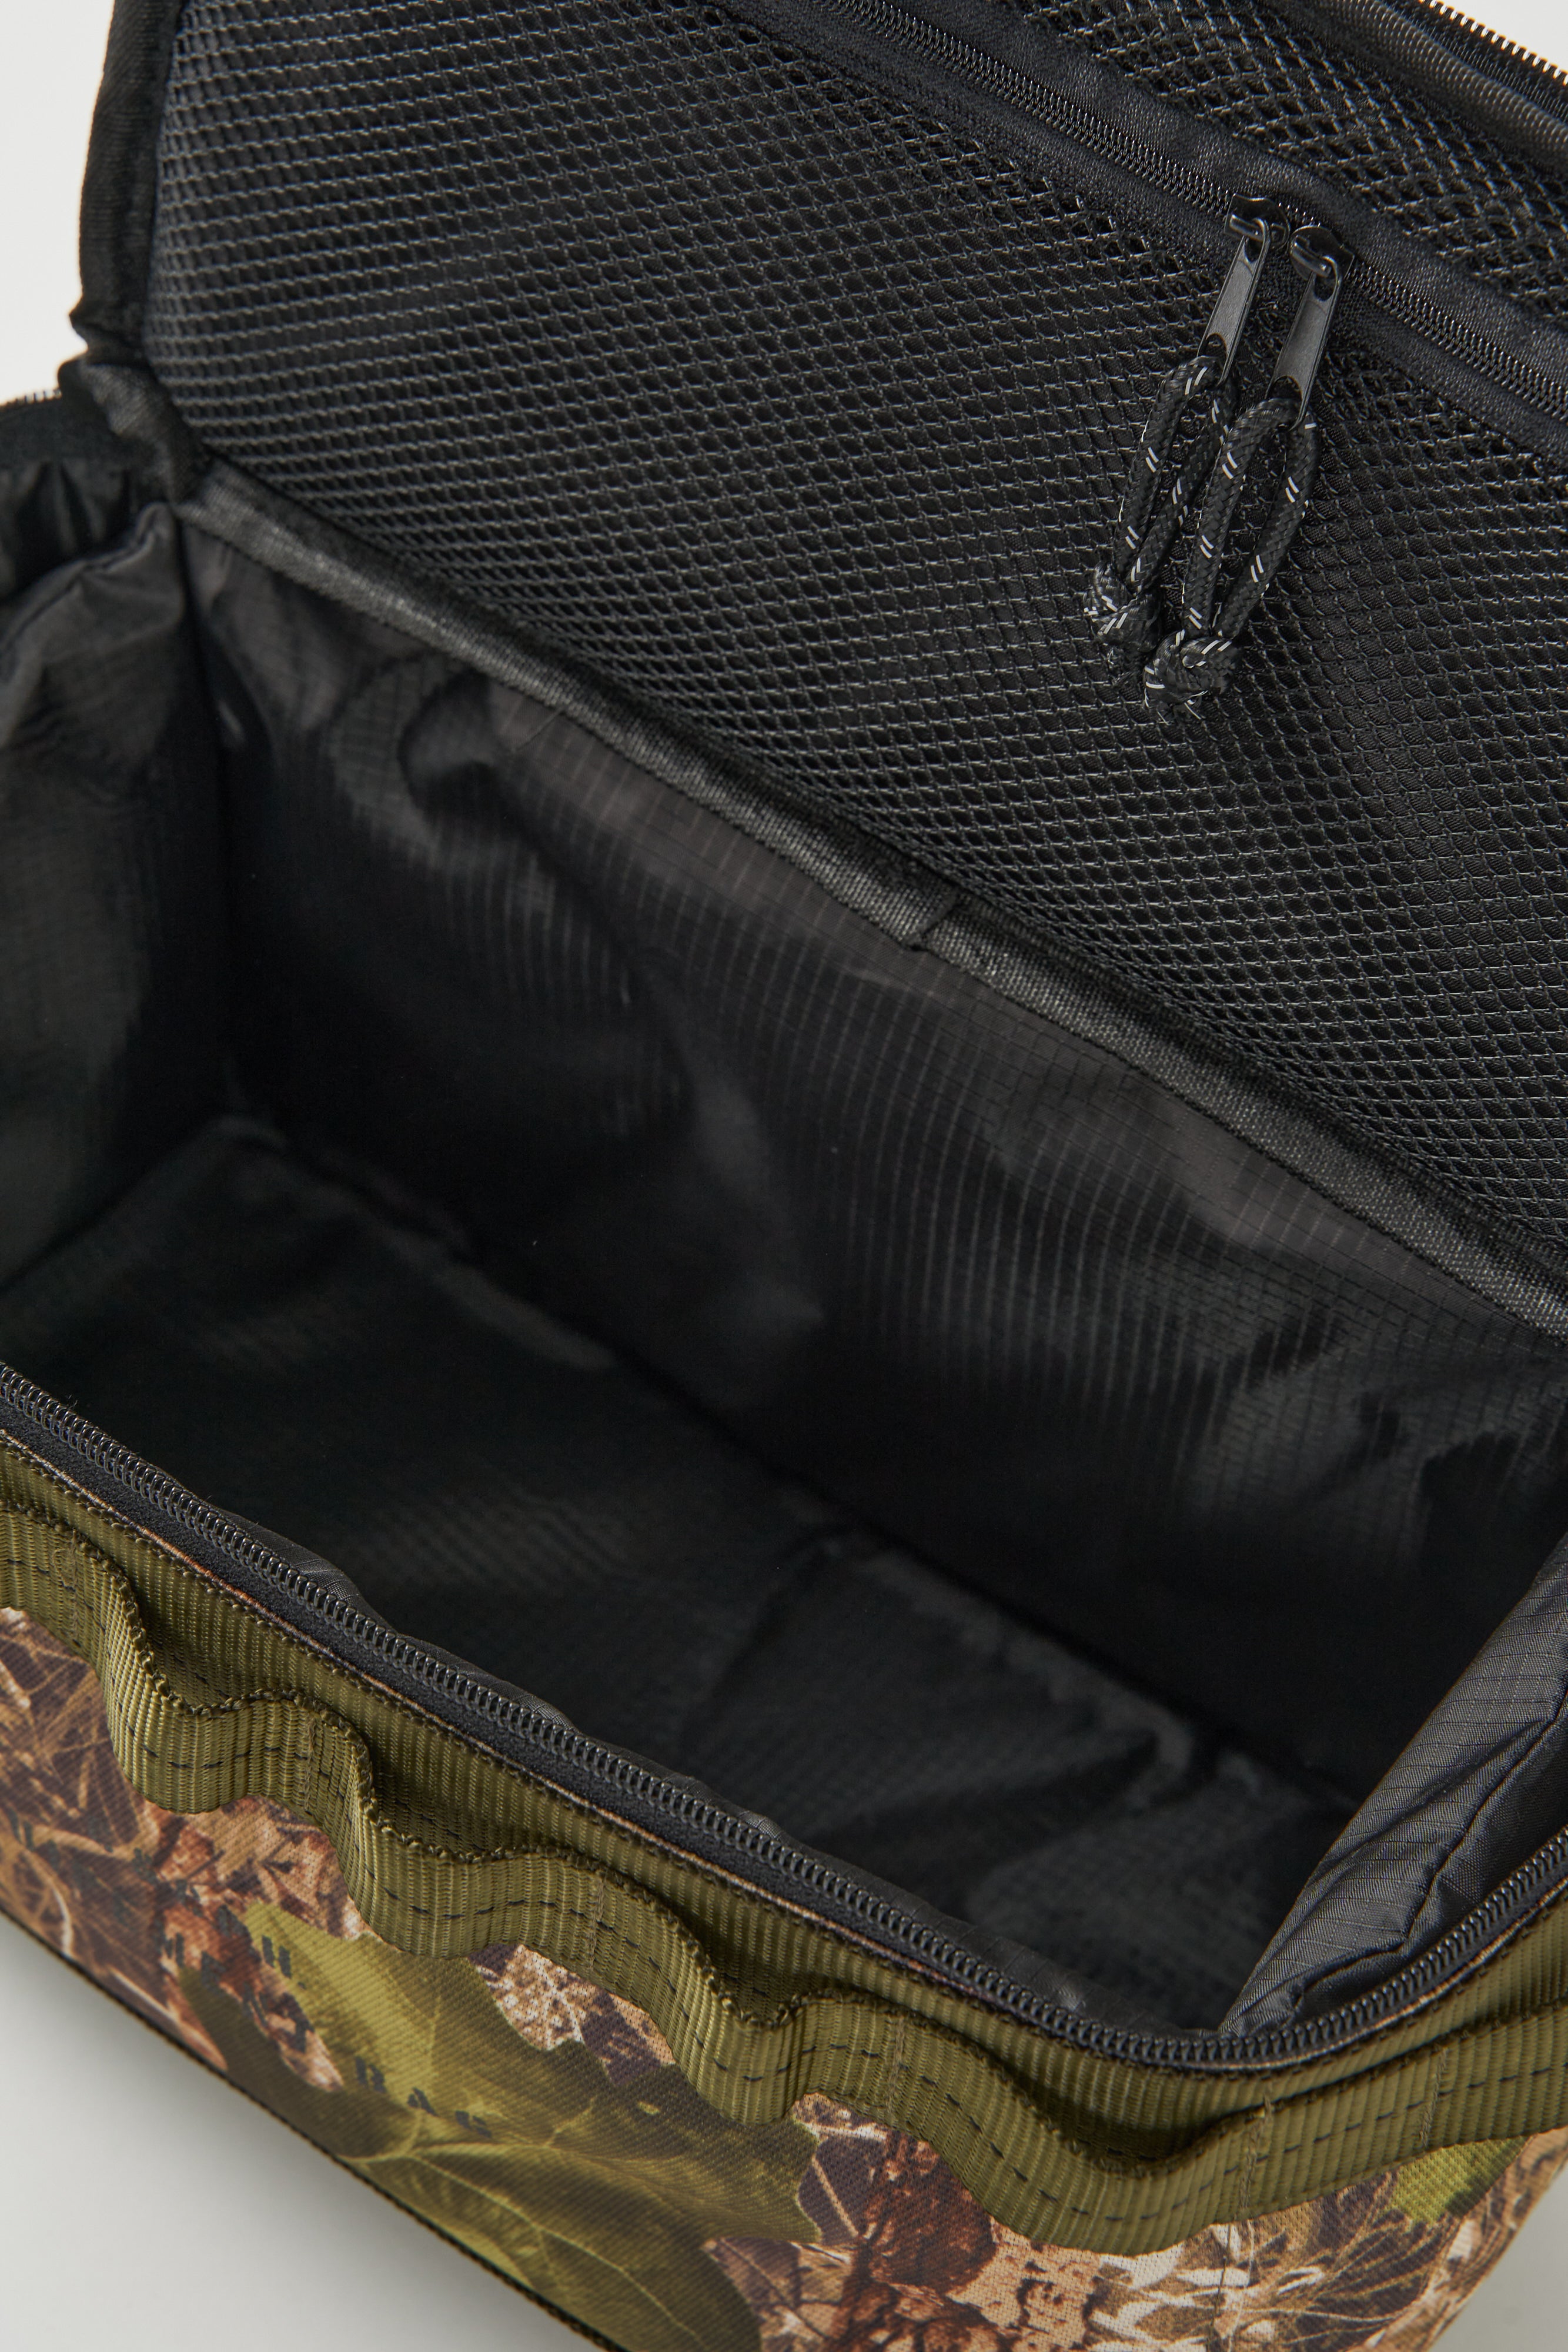 【C&C.P.H.EQUIPEMENT】CONTAINER BAG (REALTREE)CEV2000